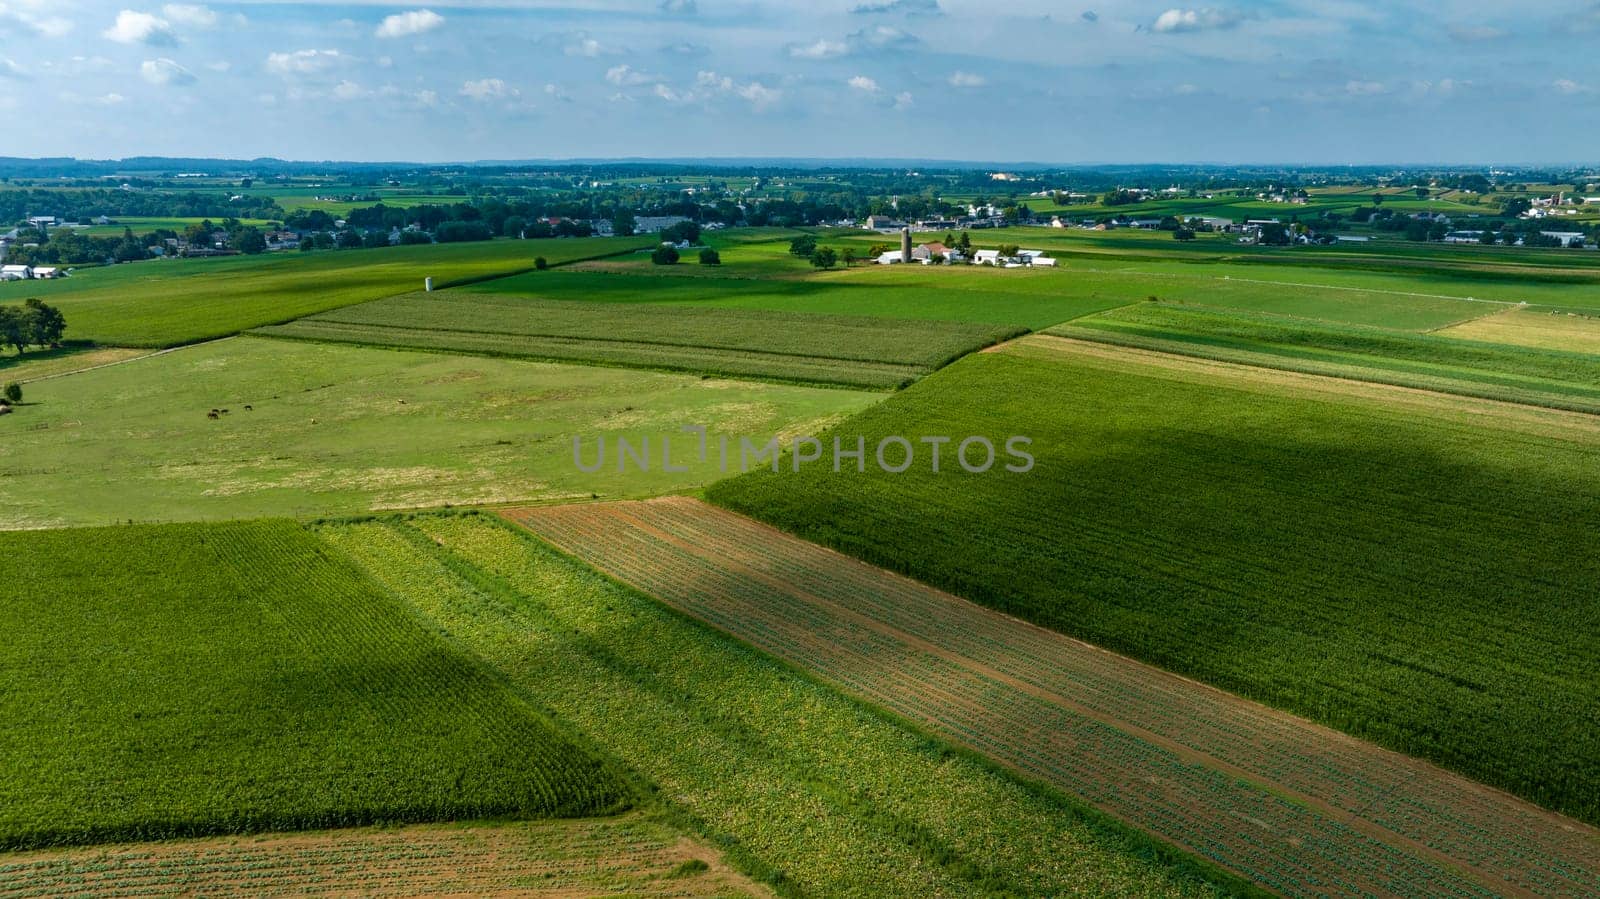 An Expansive Farmland with Rows of Crops and Barns